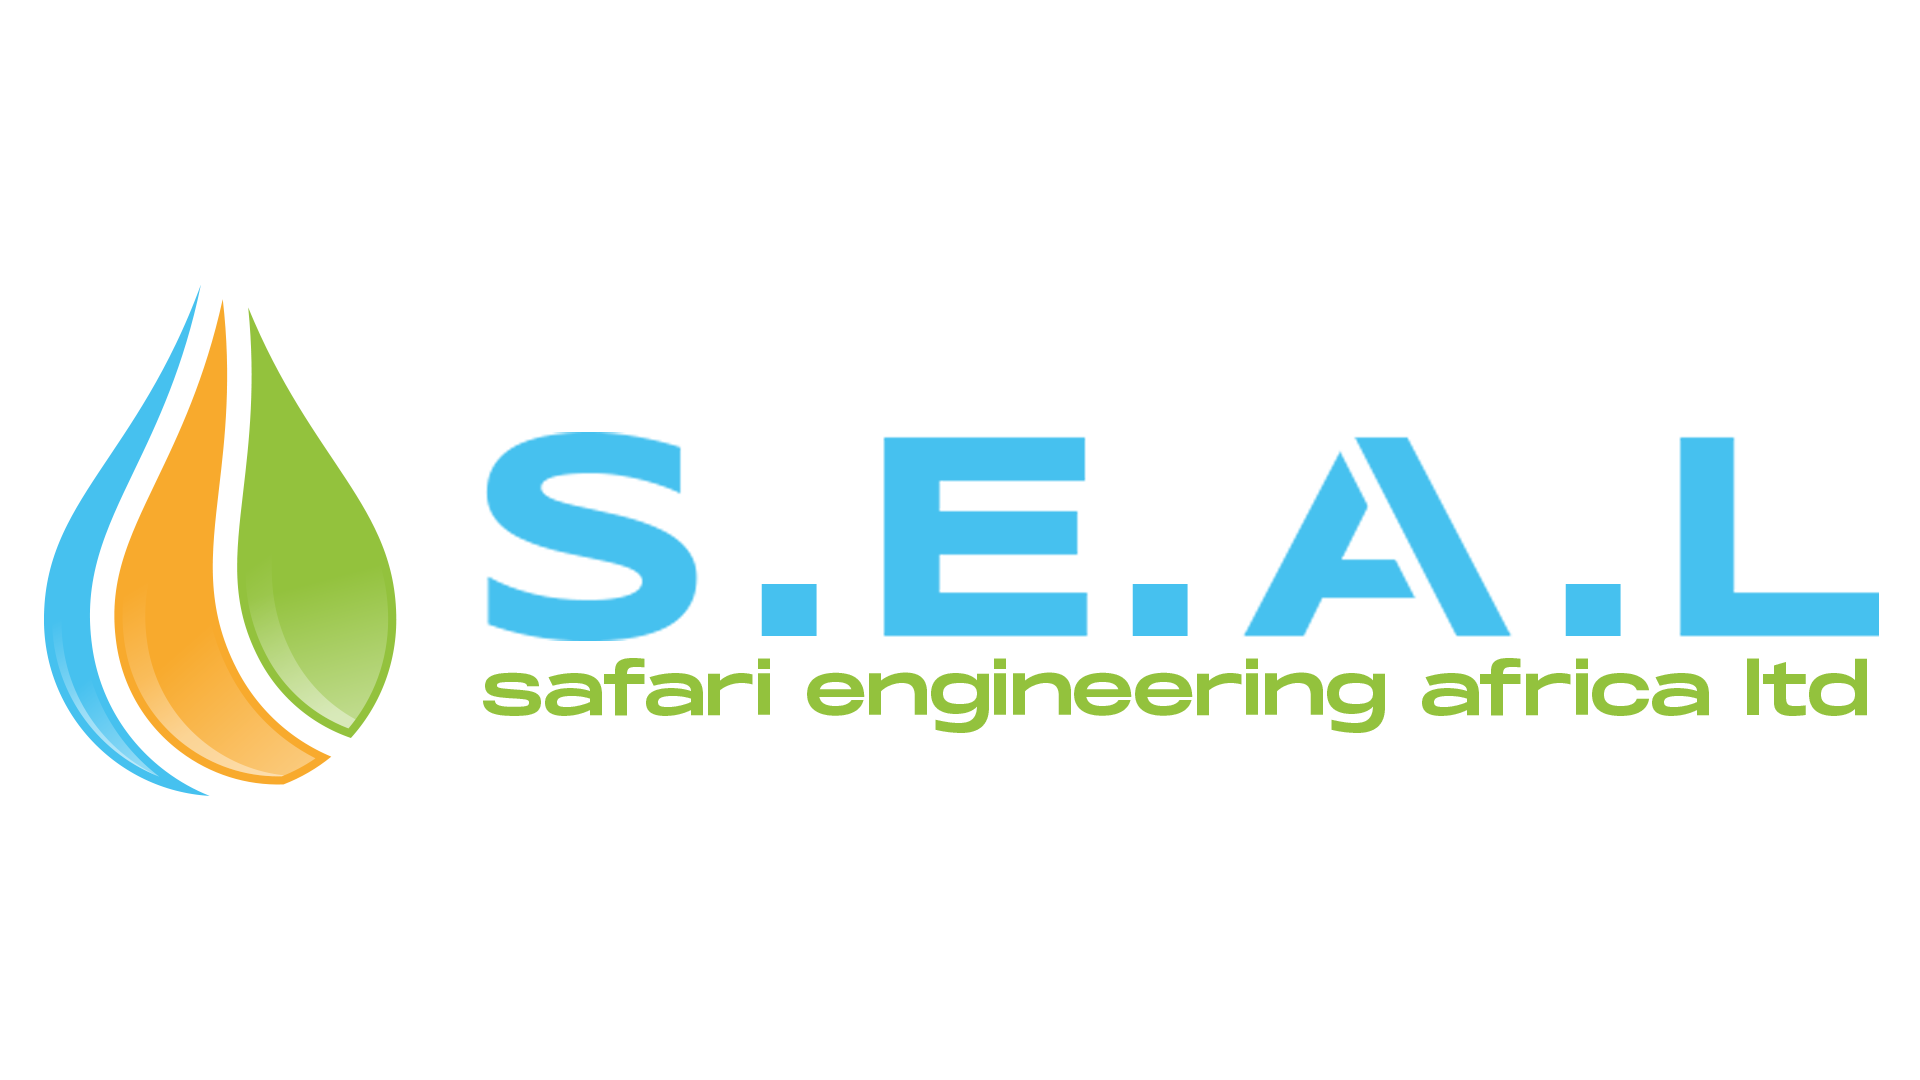 S.E.A.L – SAFARI ENGINEERING AFRICA LIMITED